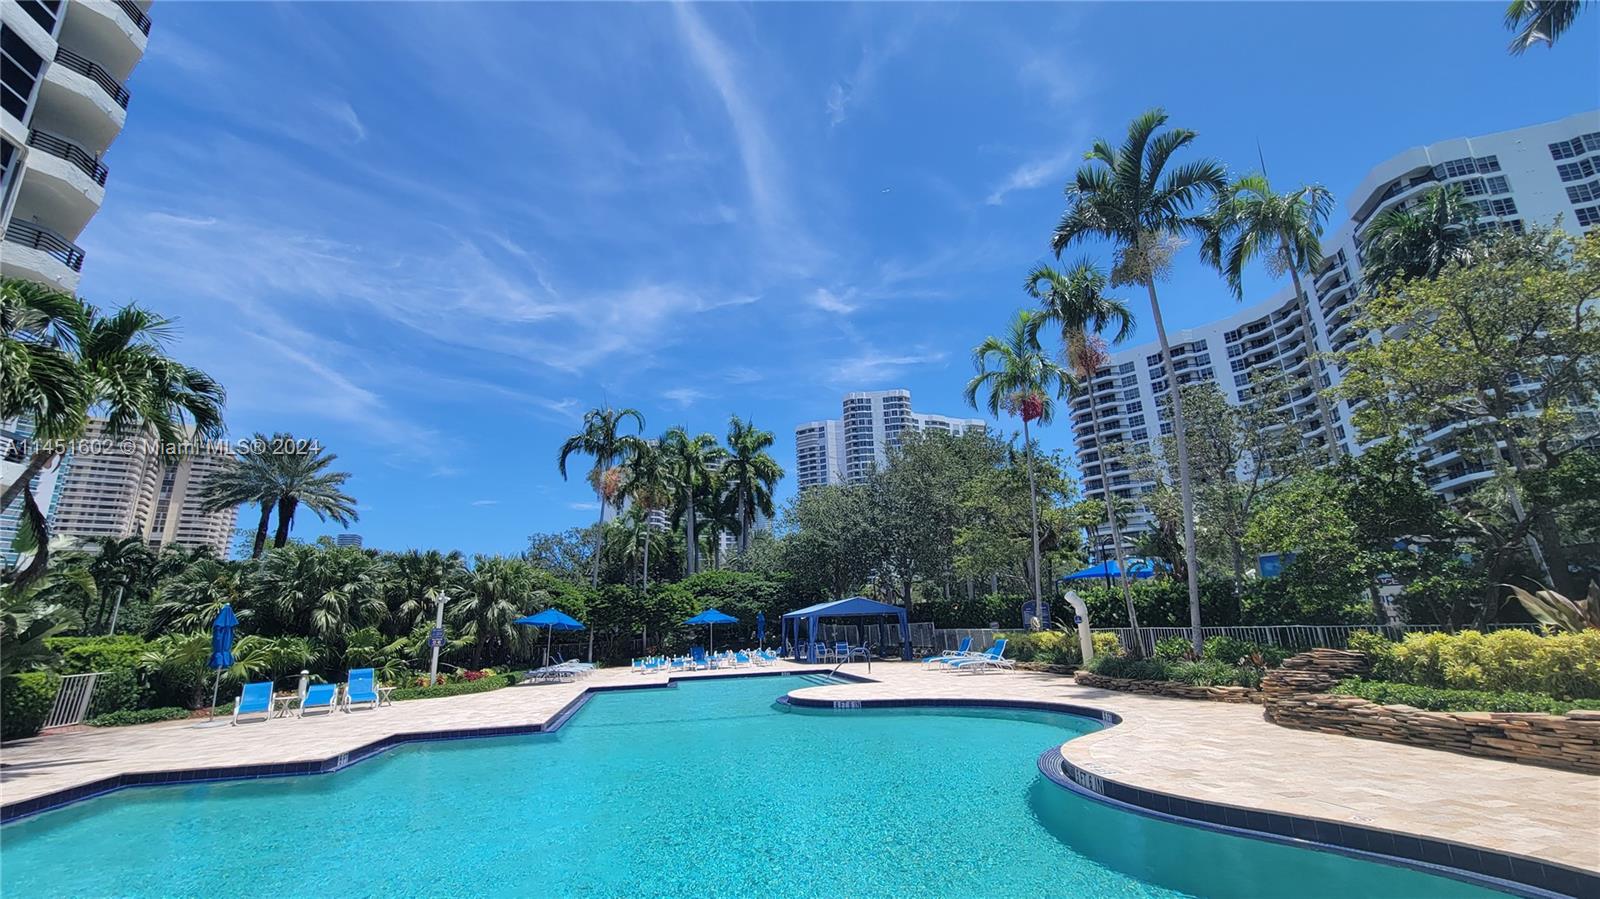 ***INVESTORS SPECIAL***COMBINE PERSONAL USE WITH RENTAL INCOME ***** Located in an impeccable gated neighborhood with a tropical resort feel in AVENTURA. A big 2 BED/2 BATH unit offers plenty of closets  with a large living room a balcony  with water views. Tile floors throughout, BRAND NEW appliances, updated and freshly painted a PLUS is a storage space located in the same floor. The HOA allows 6-month rentals once a year, 1 Pet up to 25 pds., includes WIFI, Cable, Pest Control and A/C filters service. Building has a relaxing pool, hot tub area, a gym, library, and game room on Floors 2-4. The community has it all, various retail businesses, including a mini market children playground, boat slip rentals at the on-site marina. A very spacious unit at a discounted price !!! READY TO MOVE!!